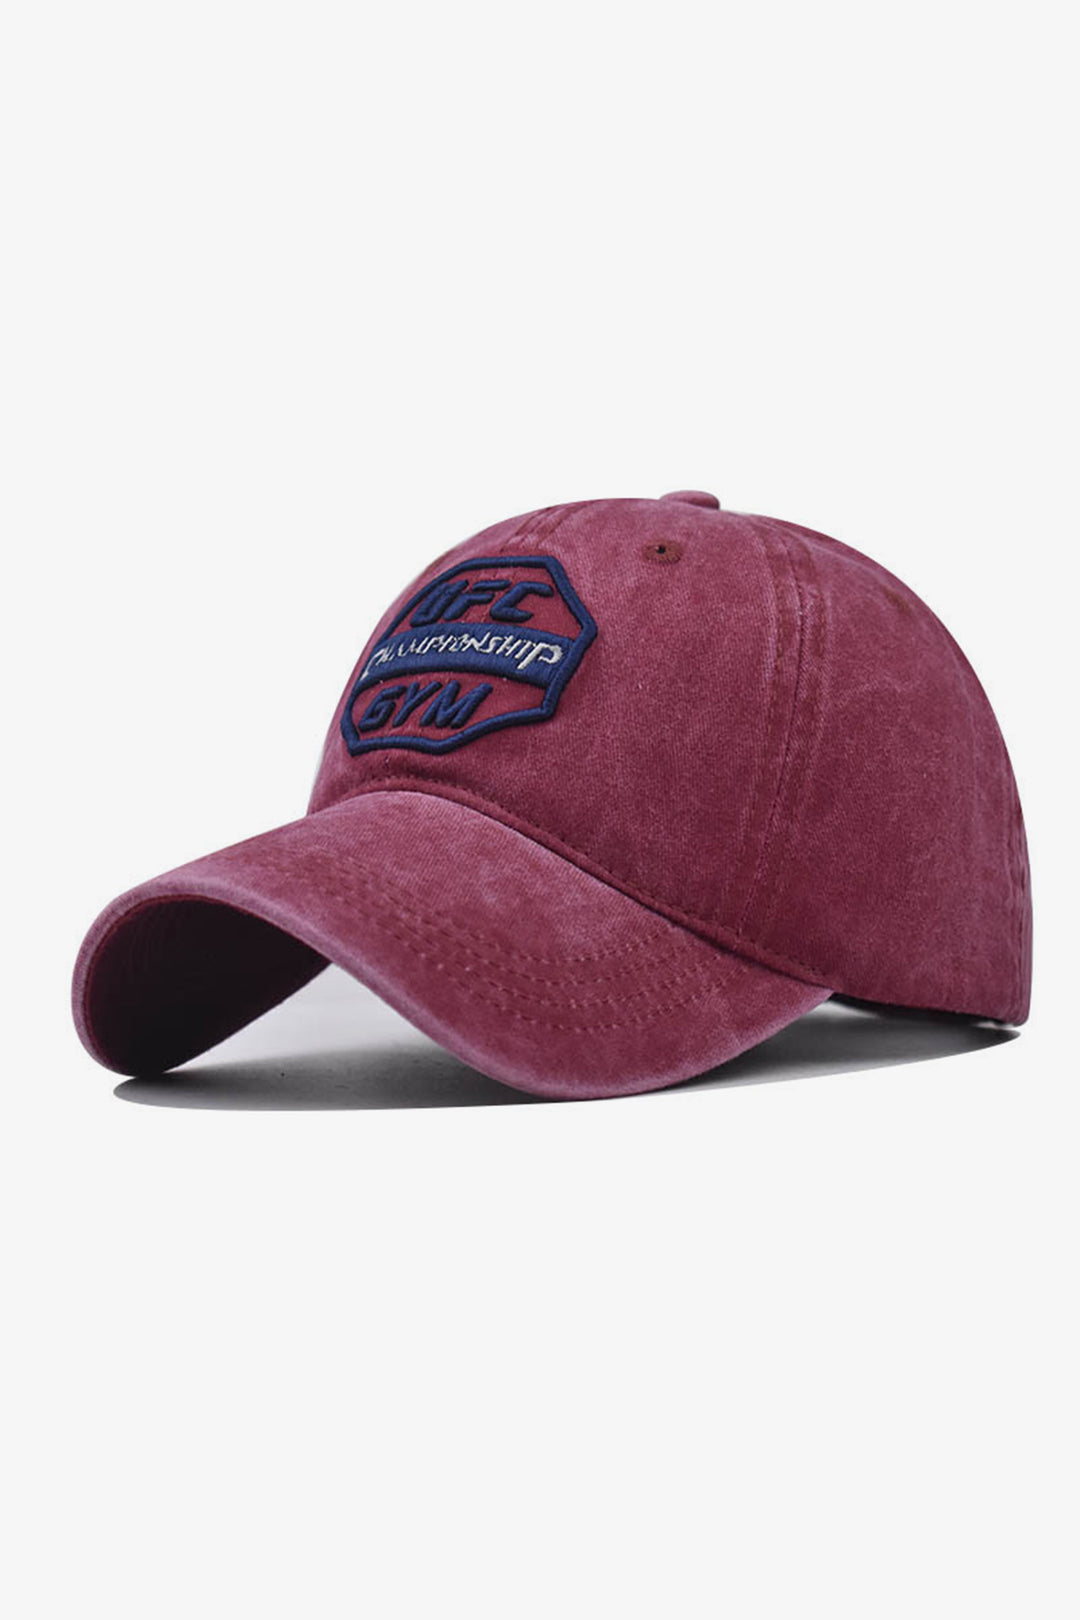 Embroidered Cap Online in Pakistan